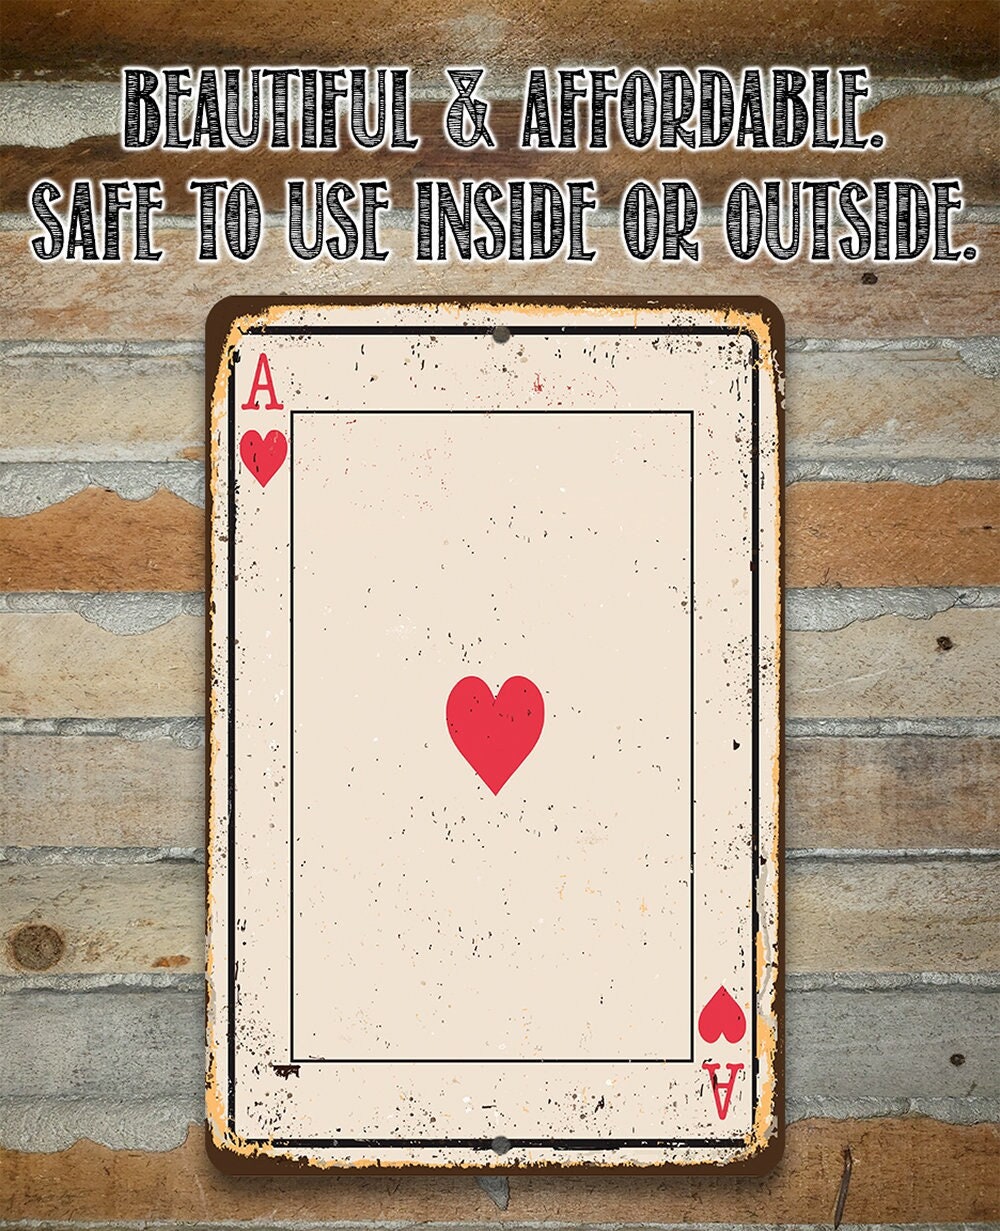 Ace of Hearts Card - 8" x 12" or 12" x 18" Aluminum Tin Awesome Gothic Metal Poster Lone Star Art 